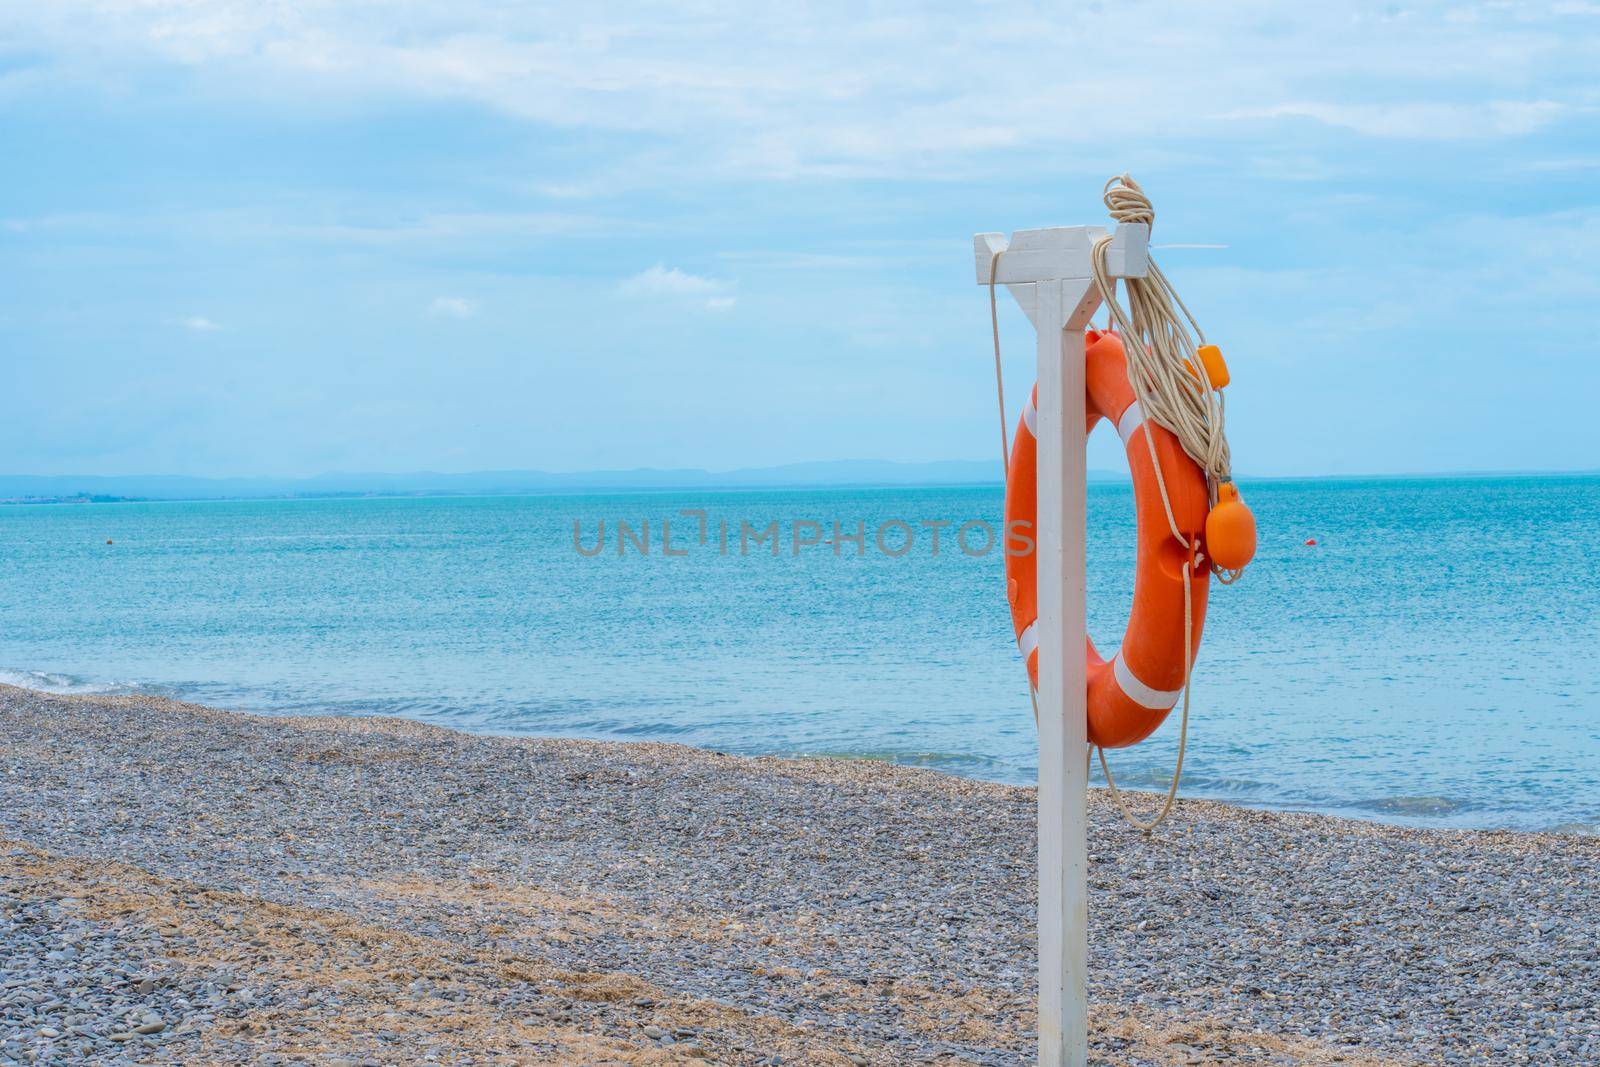 Life ring beach sea buoy orange closeup saving rescue round, concept red guard from emergency from ocean assistance, shore safe. Survival background calm, by 89167702191